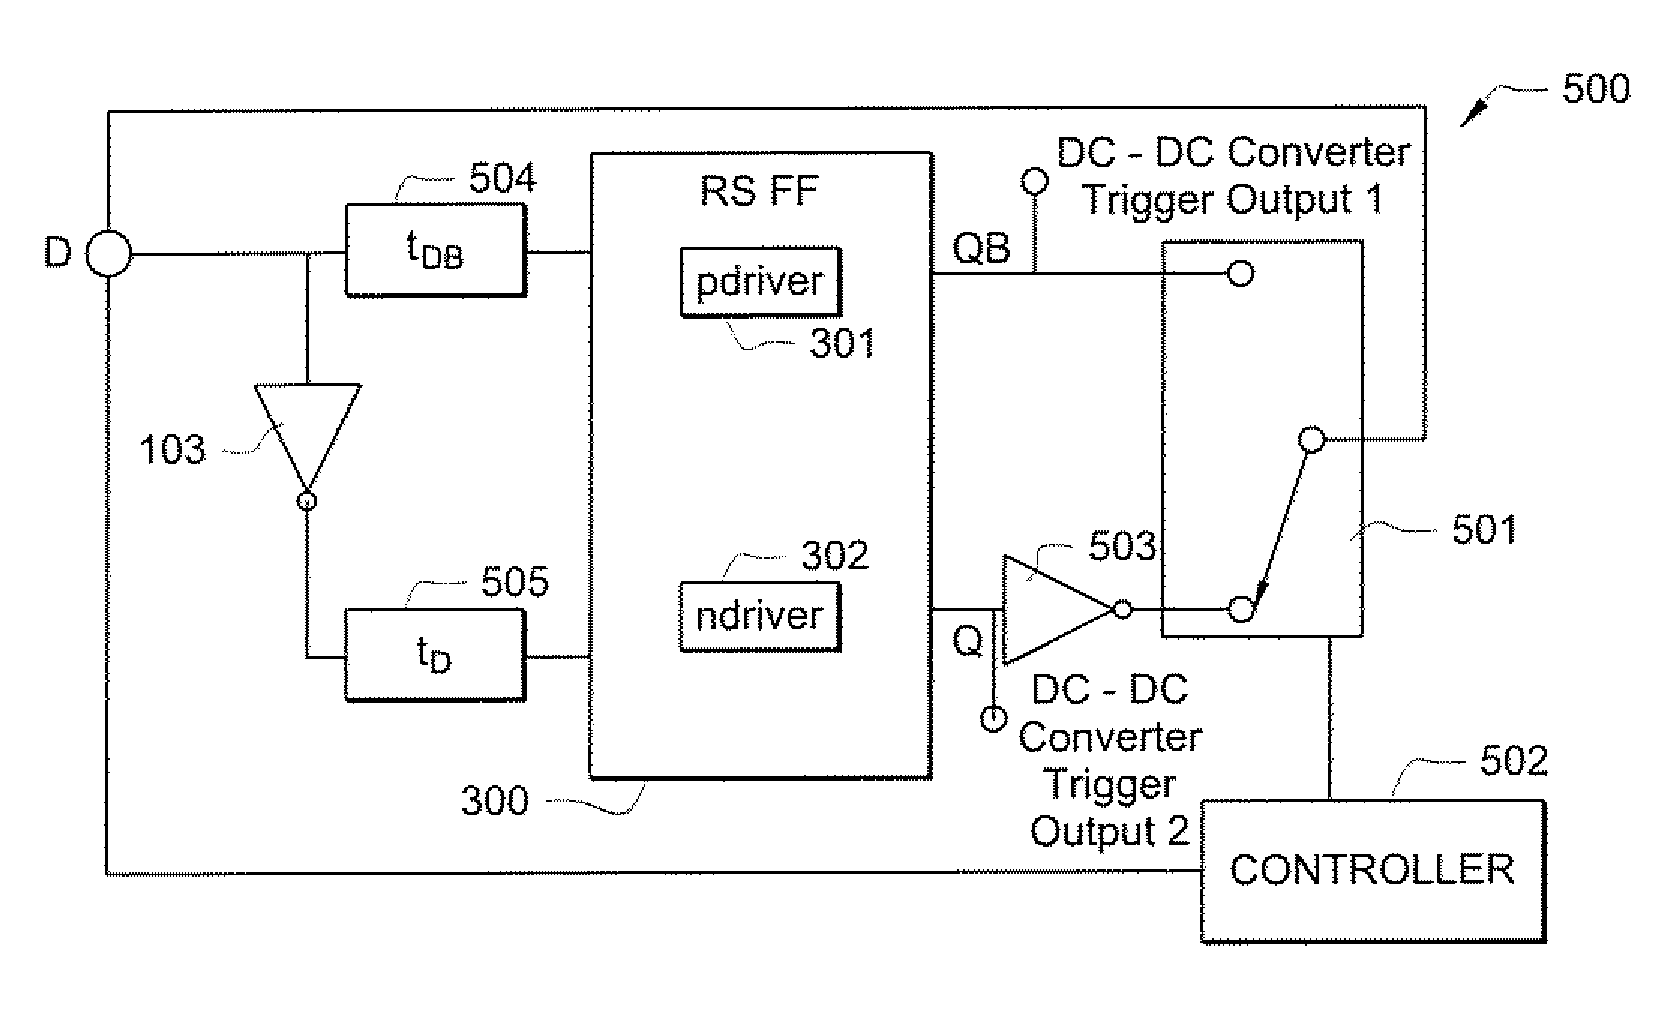 Low voltage synchronous oscillator for DC-DC converter